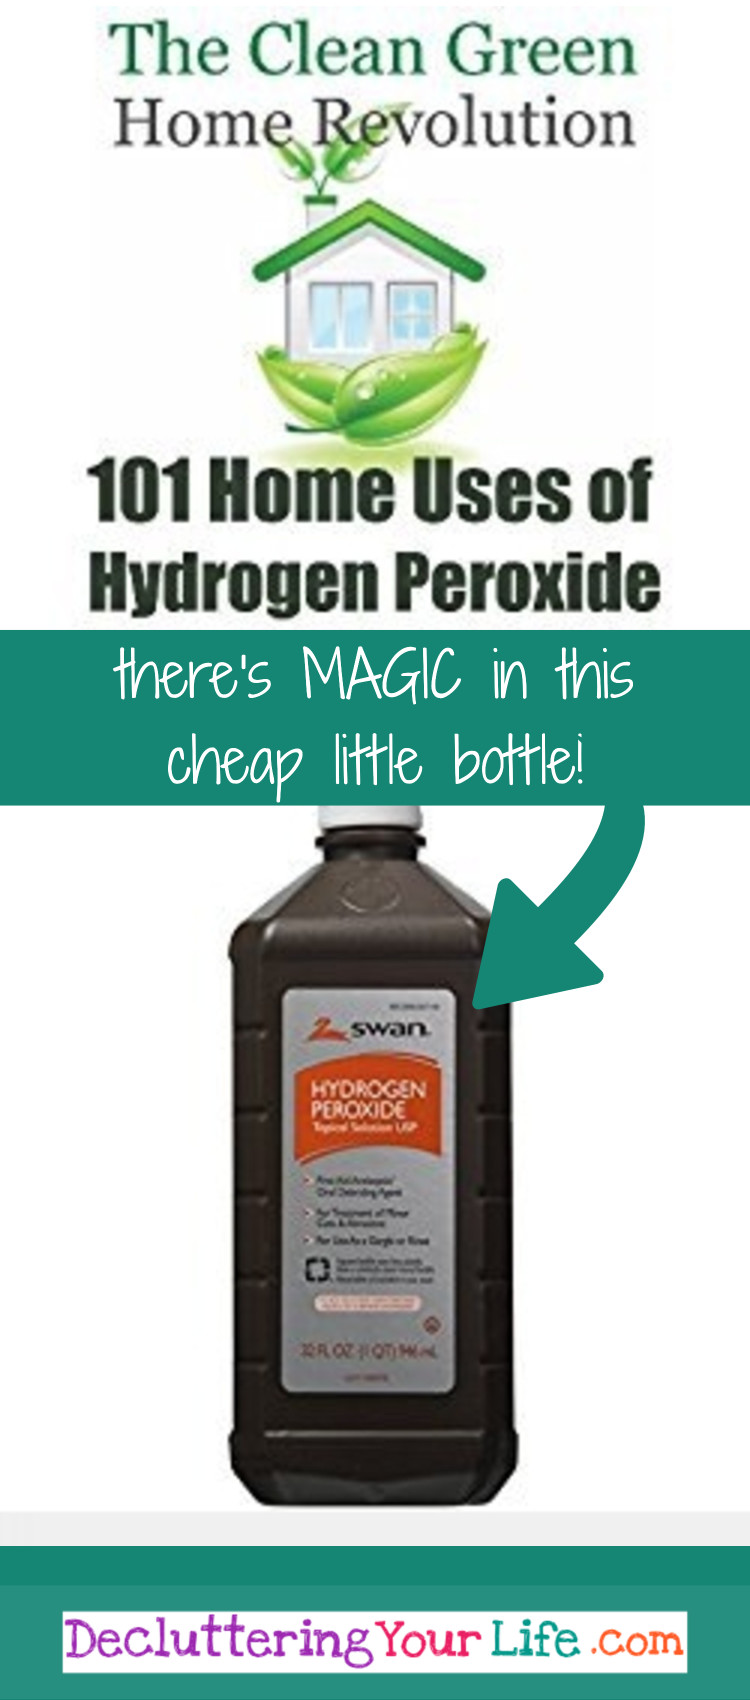 Hydrogen Peroxide Uses - How to use Hydrogen peroxide as a cleaner, sanitizer, disinfectant, and germ KILLER!